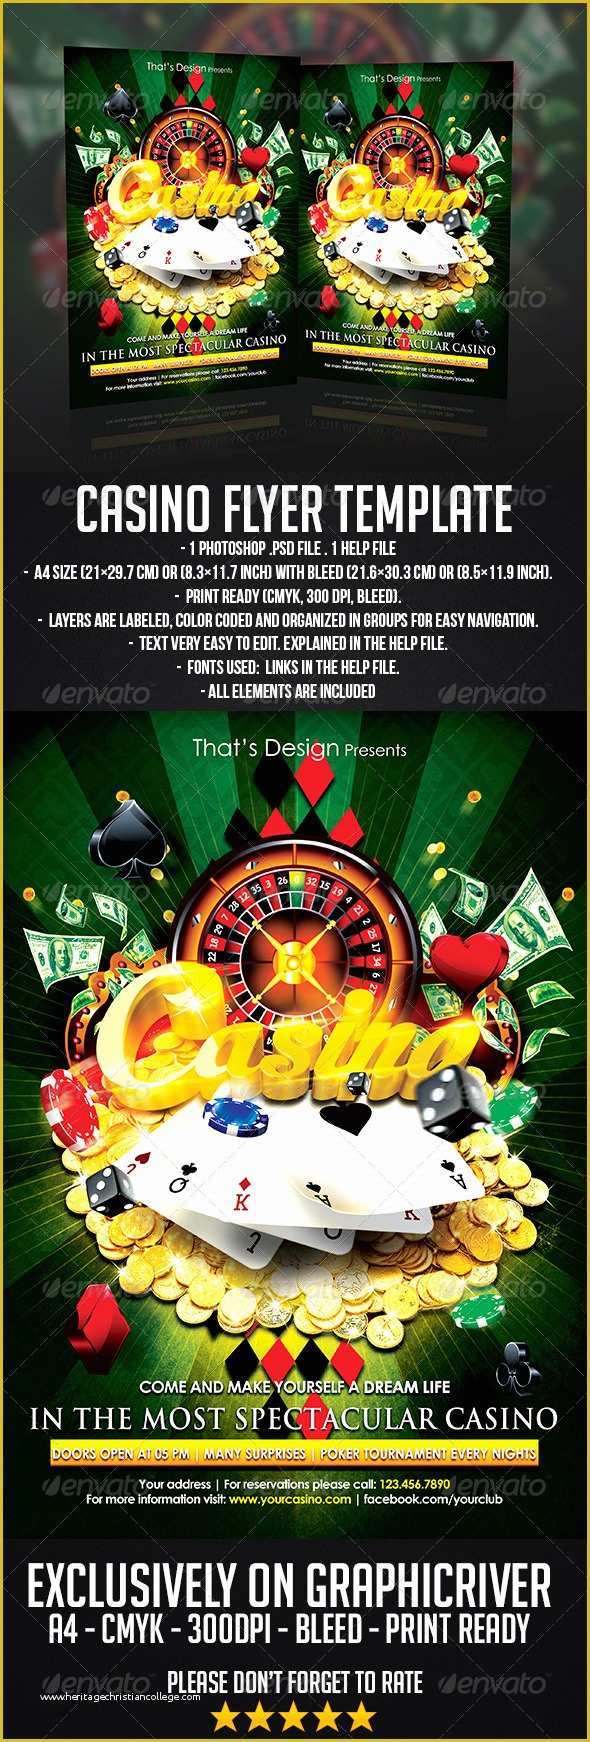 Casino Flyer Template Free Of Print Template Graphicriver Casino Flyer Template Dondrup